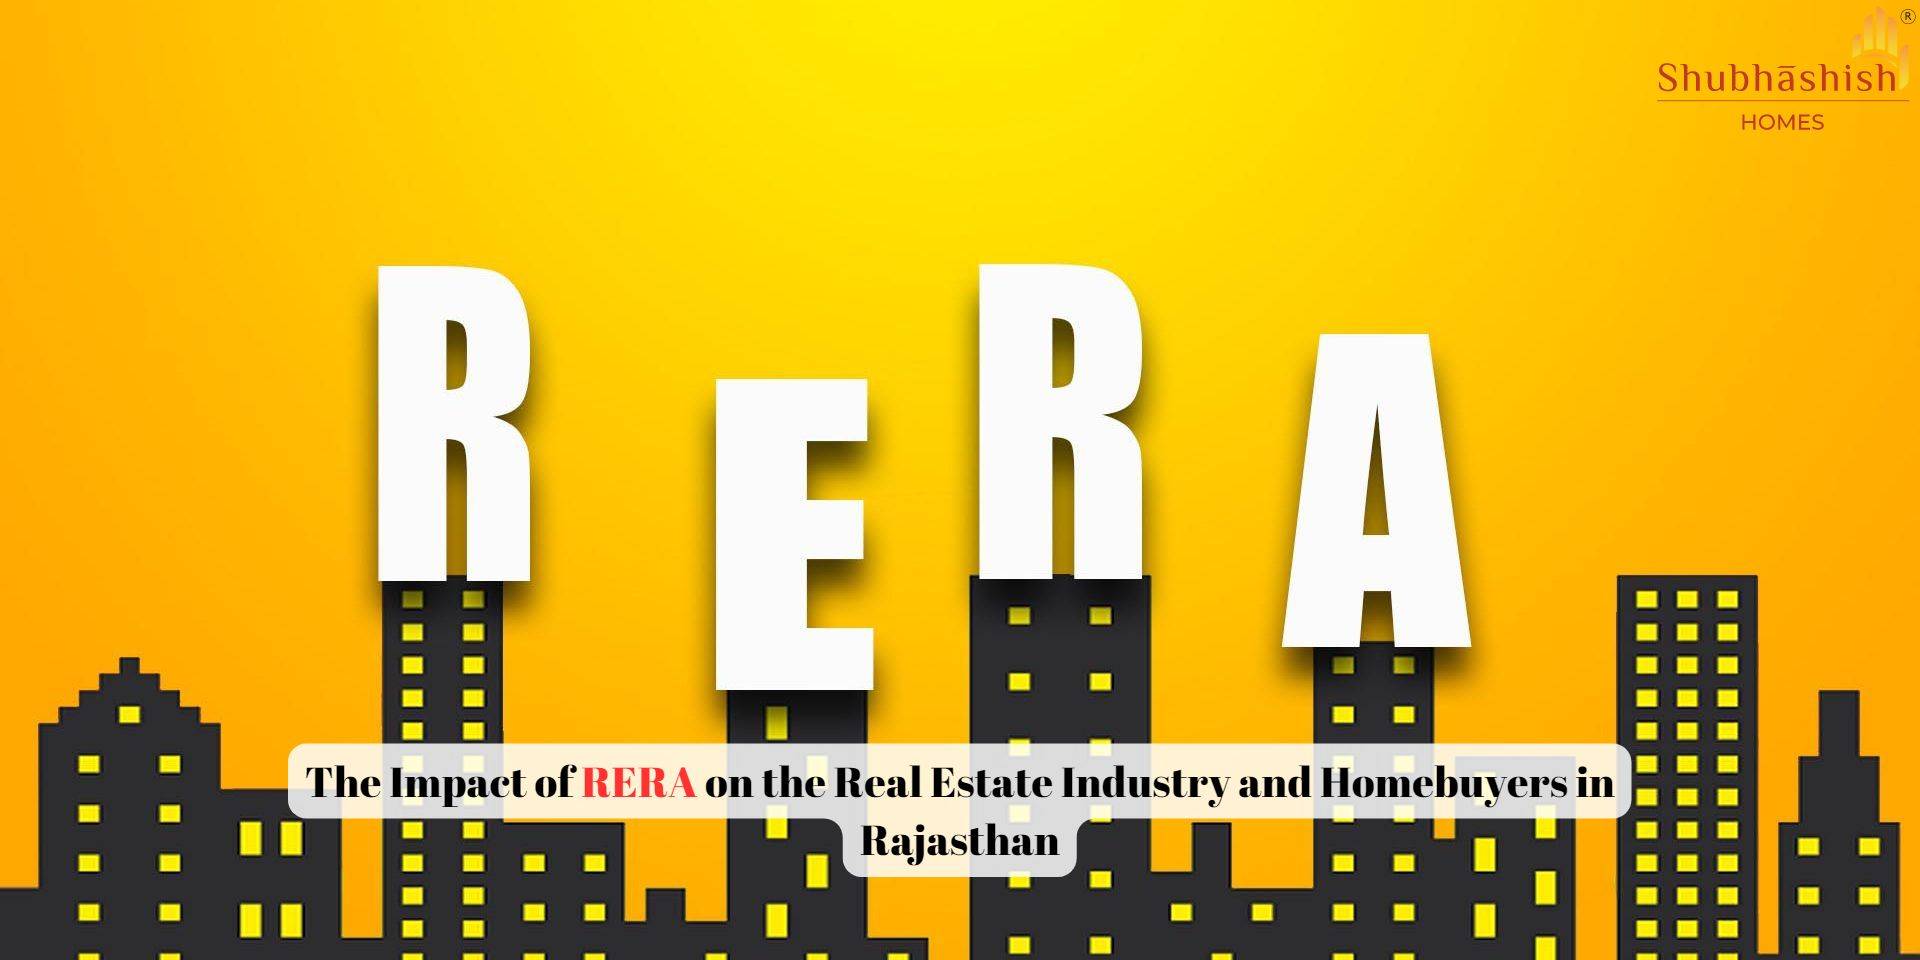 The Impact of RERA on the Real Estate Industry and Homebuyers in Rajasthan